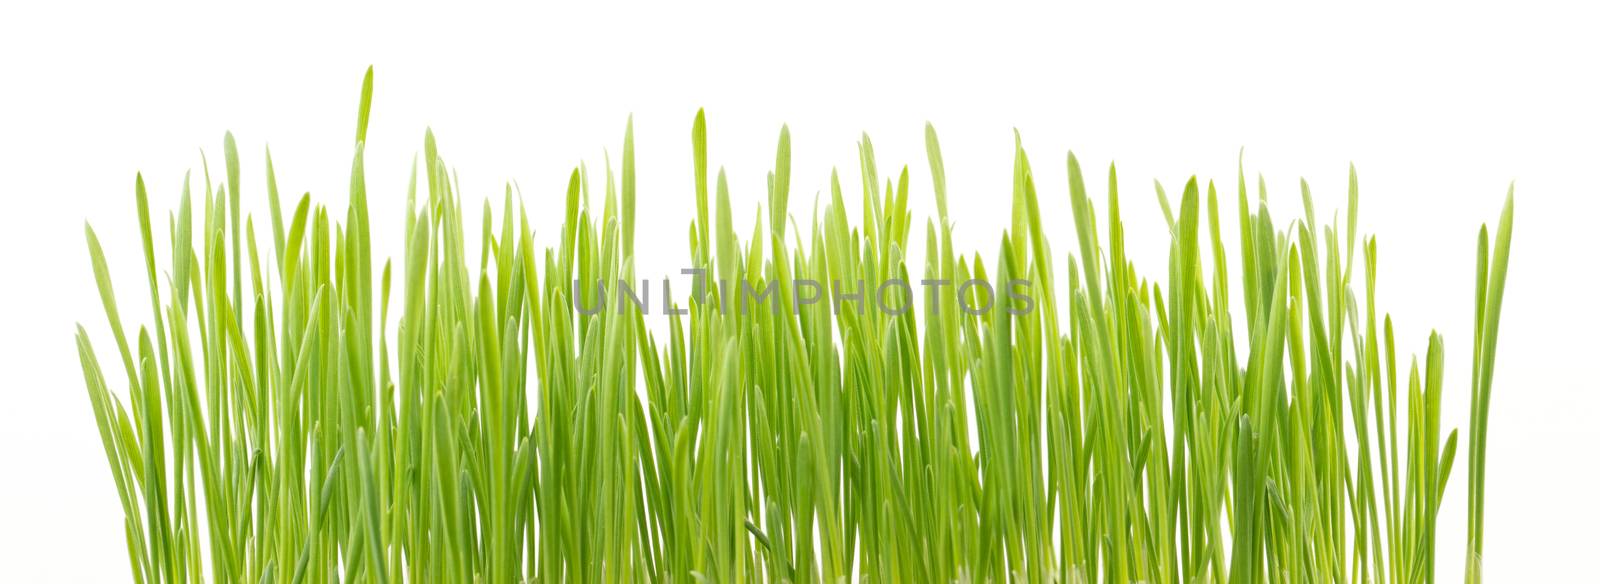 
Green wheat grass isolated on white background by anankkml